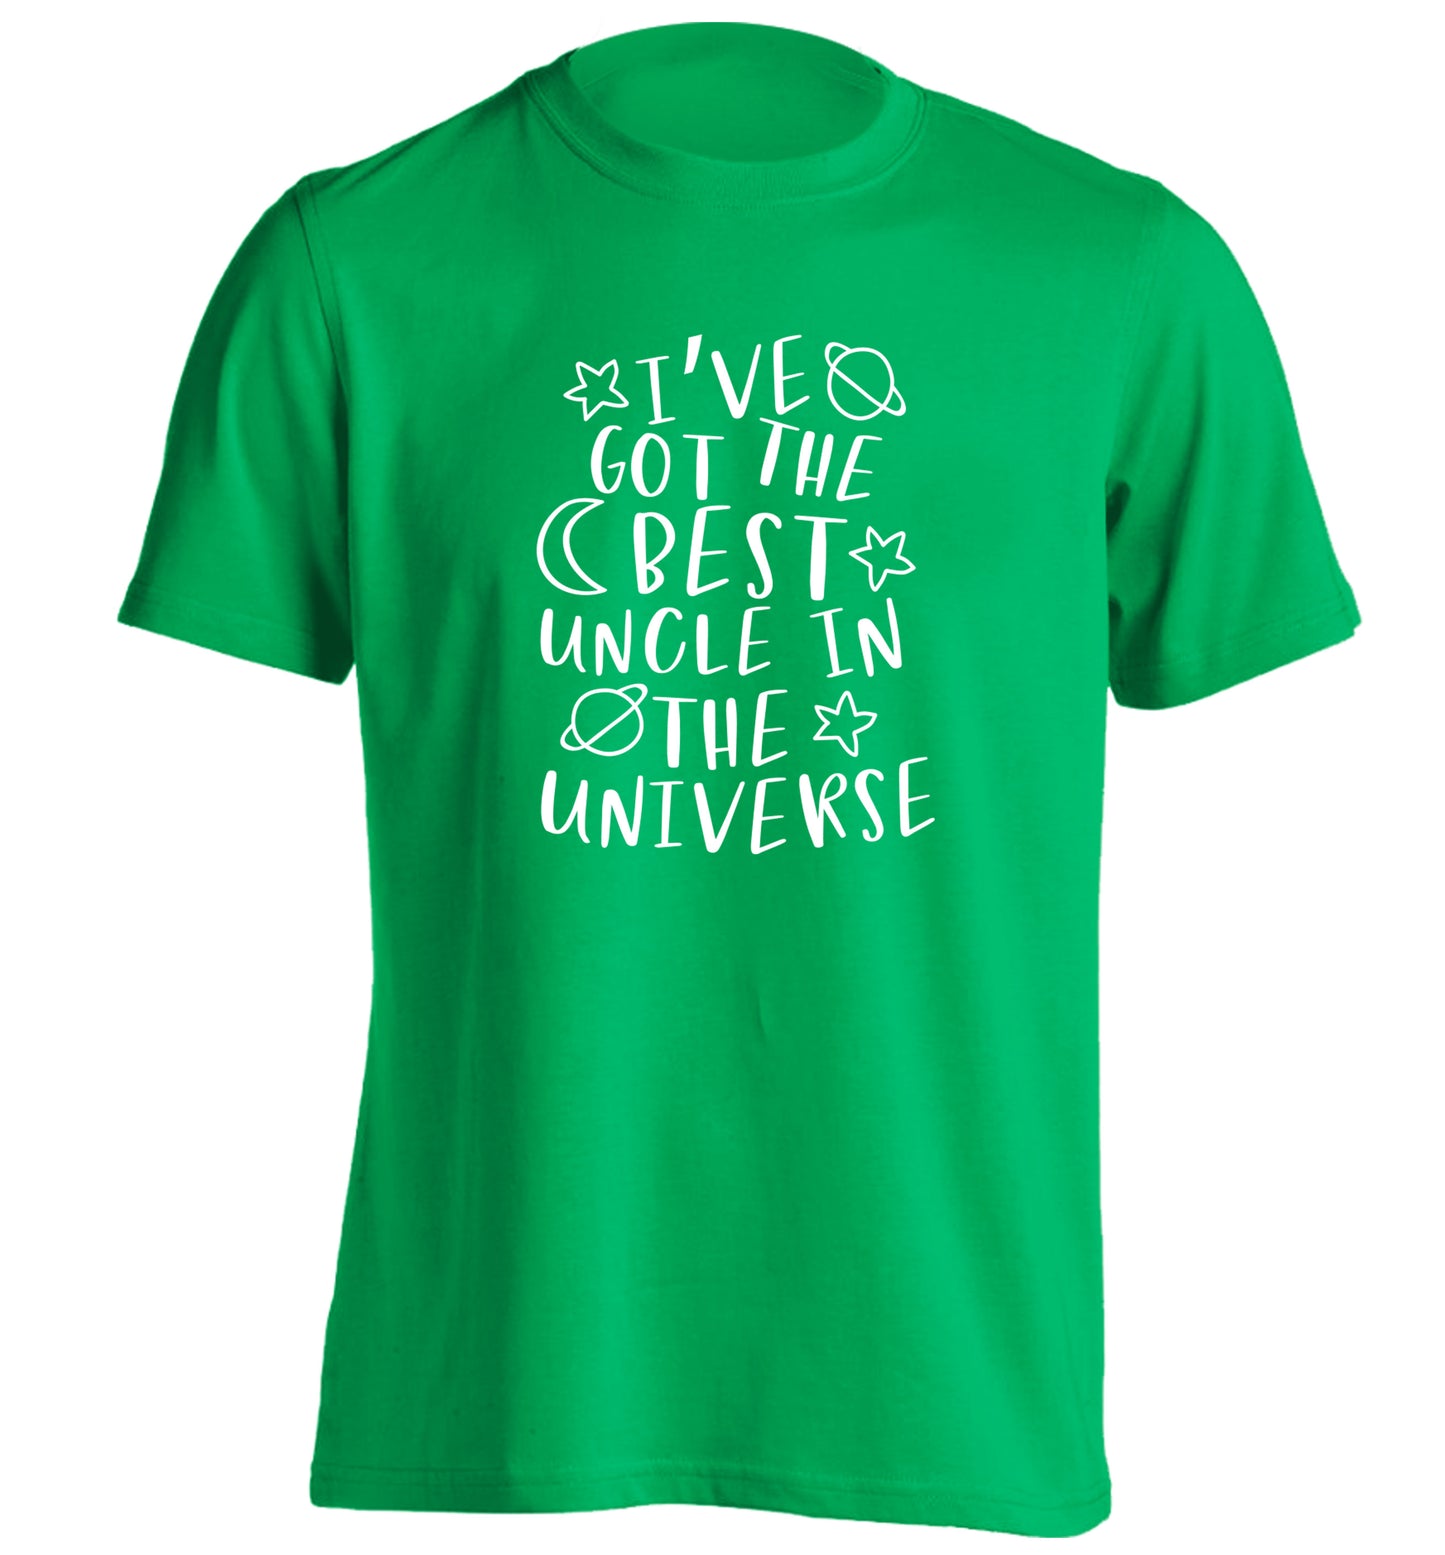 I've got the best uncle in the universe adults unisex green Tshirt 2XL